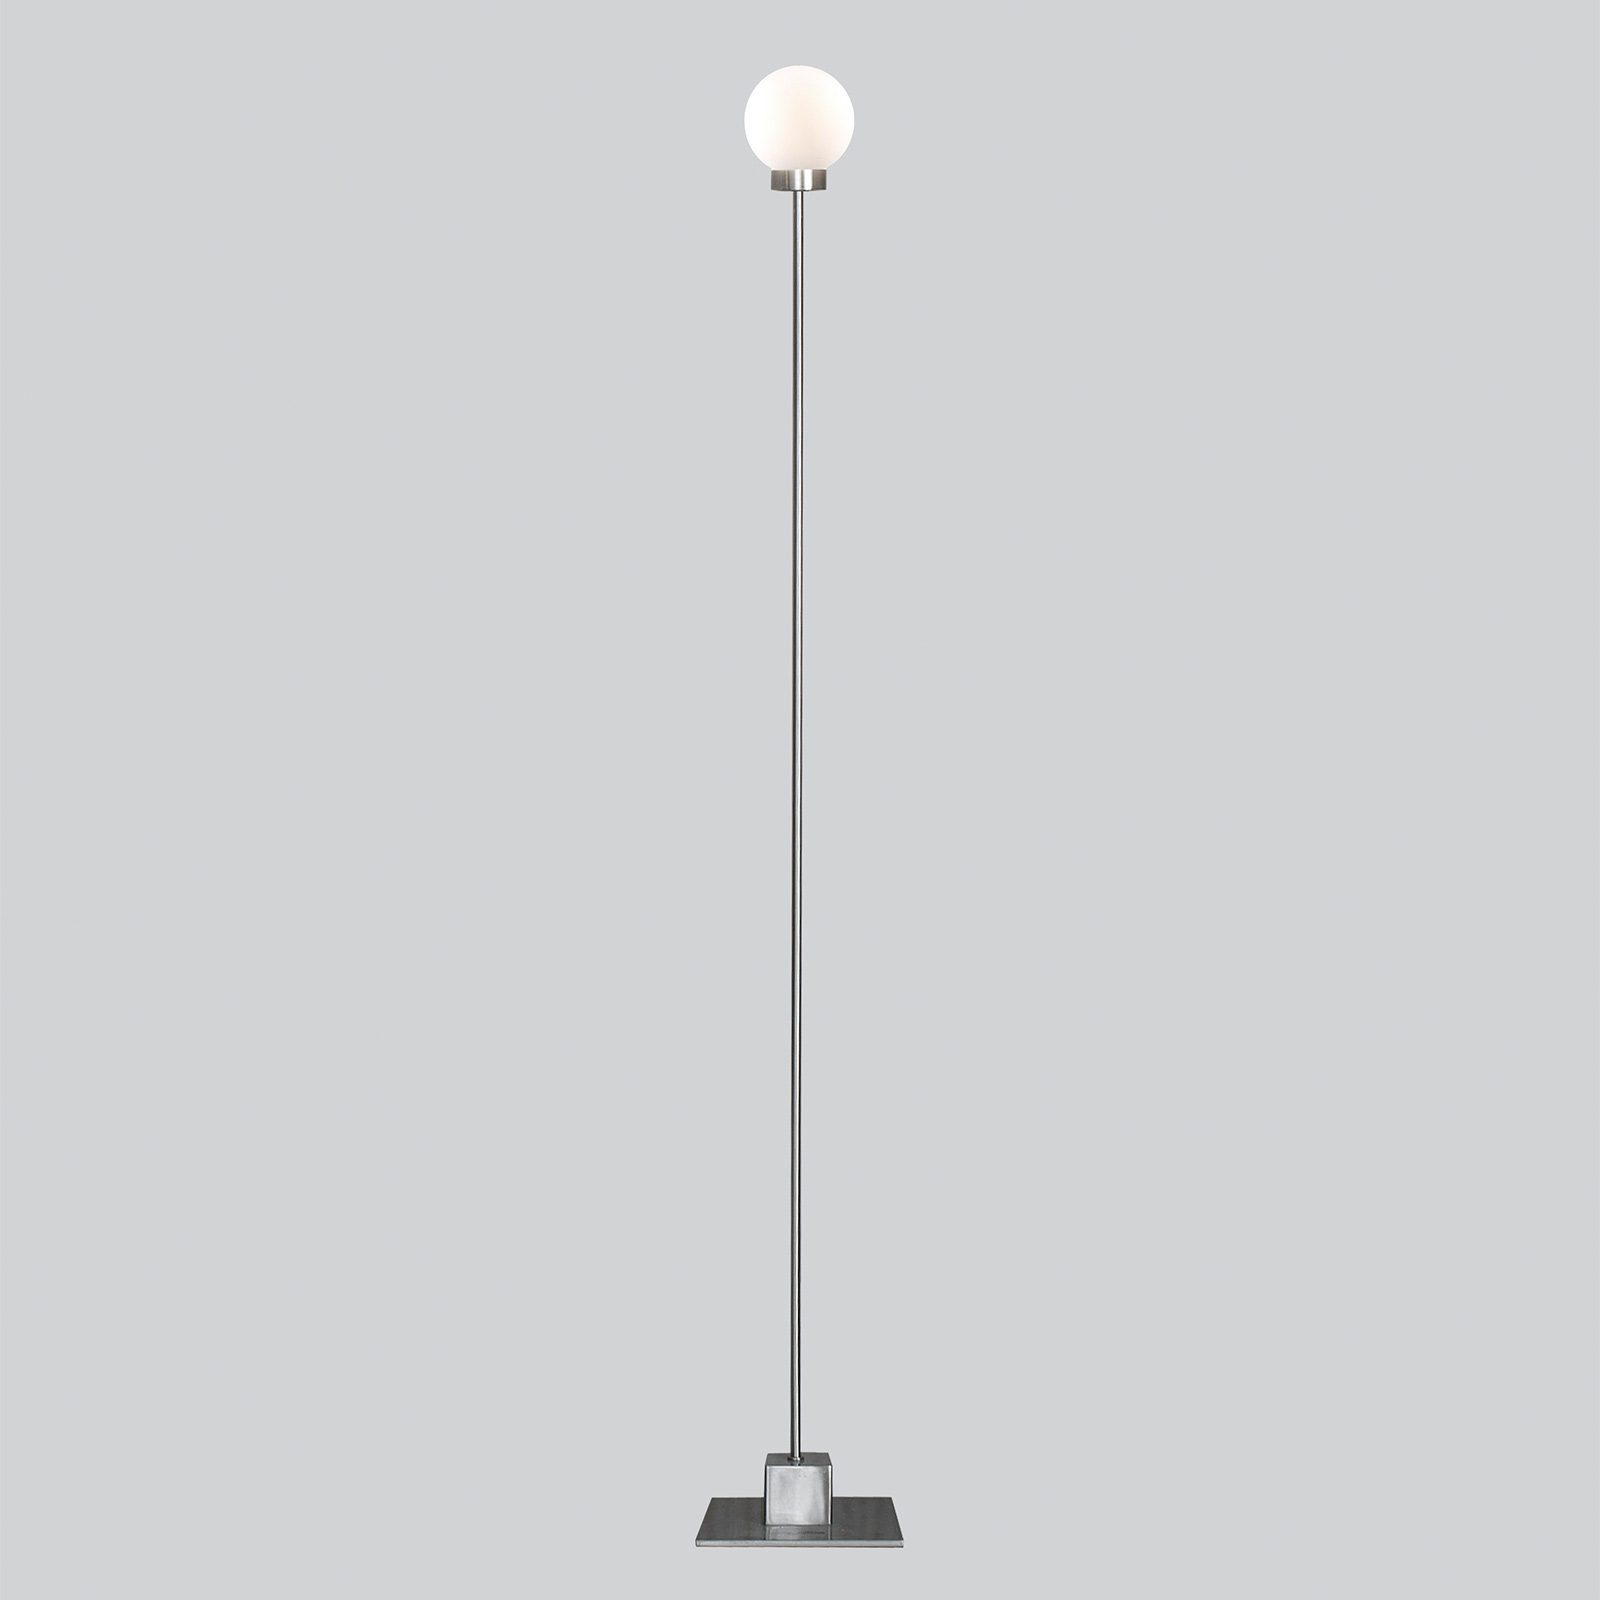 Northern vloerlamp Snowball, staal